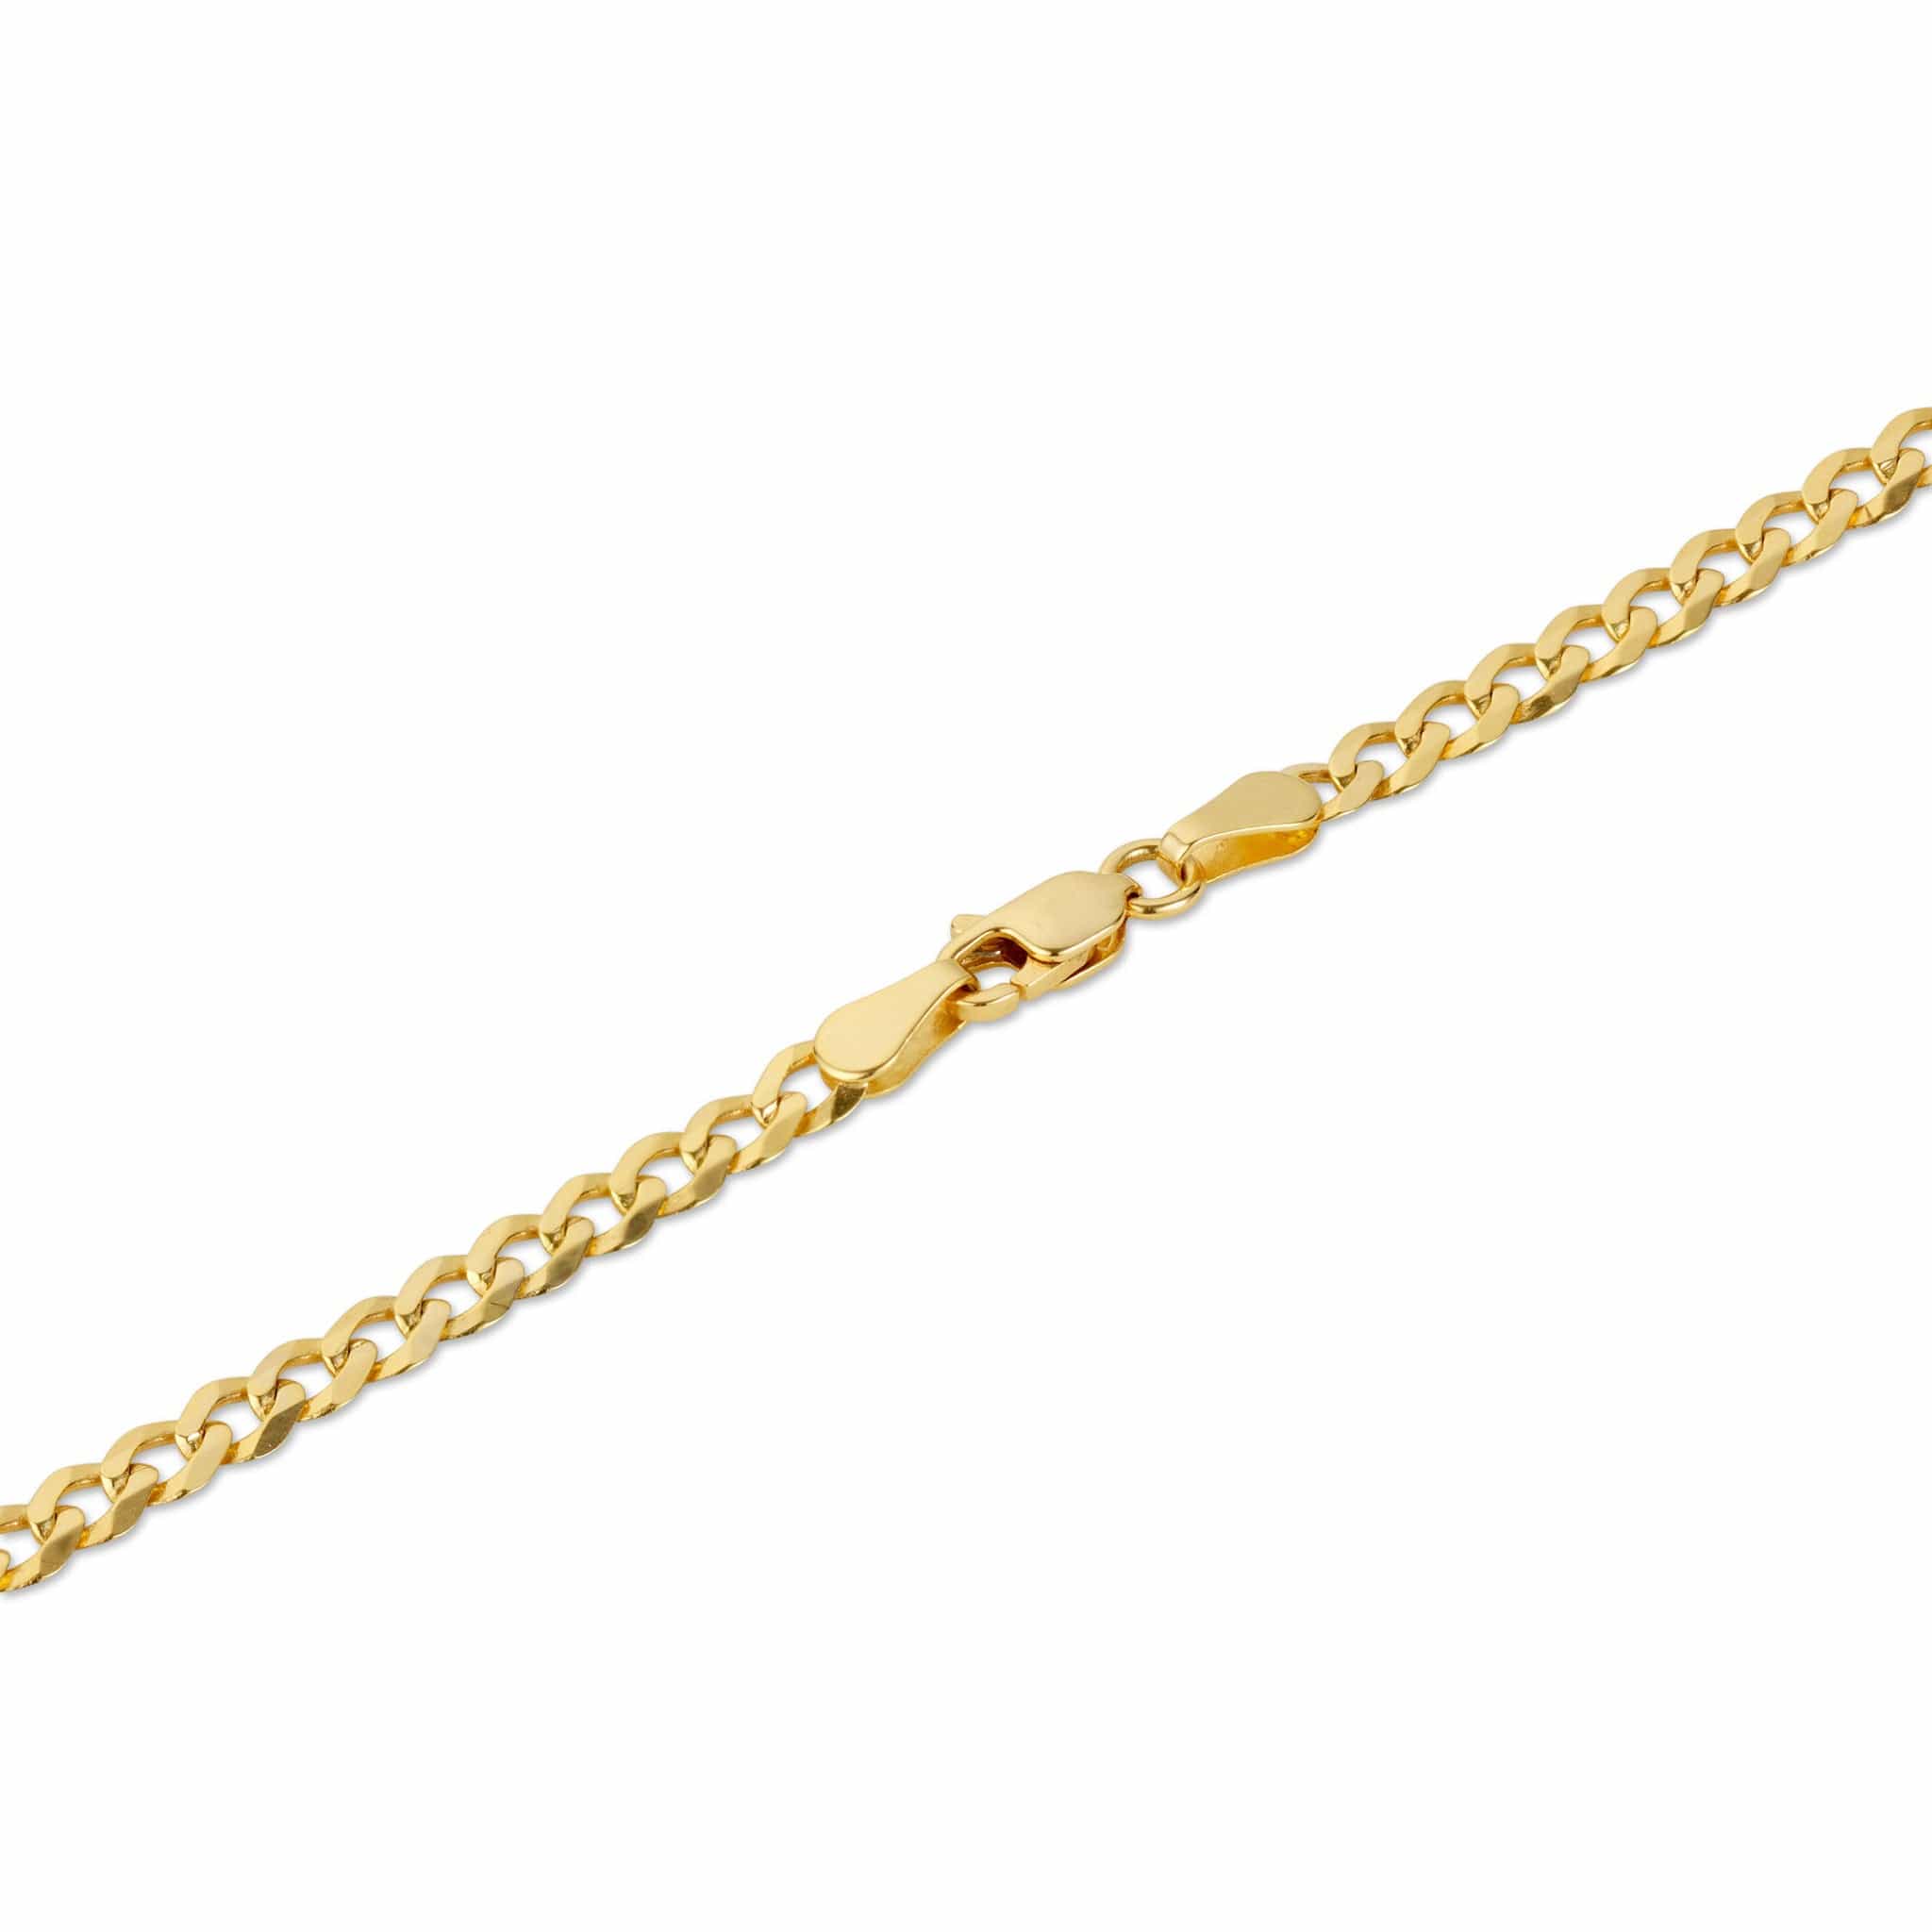 Close-up of a gold curb chain showing the clasp and individual links.